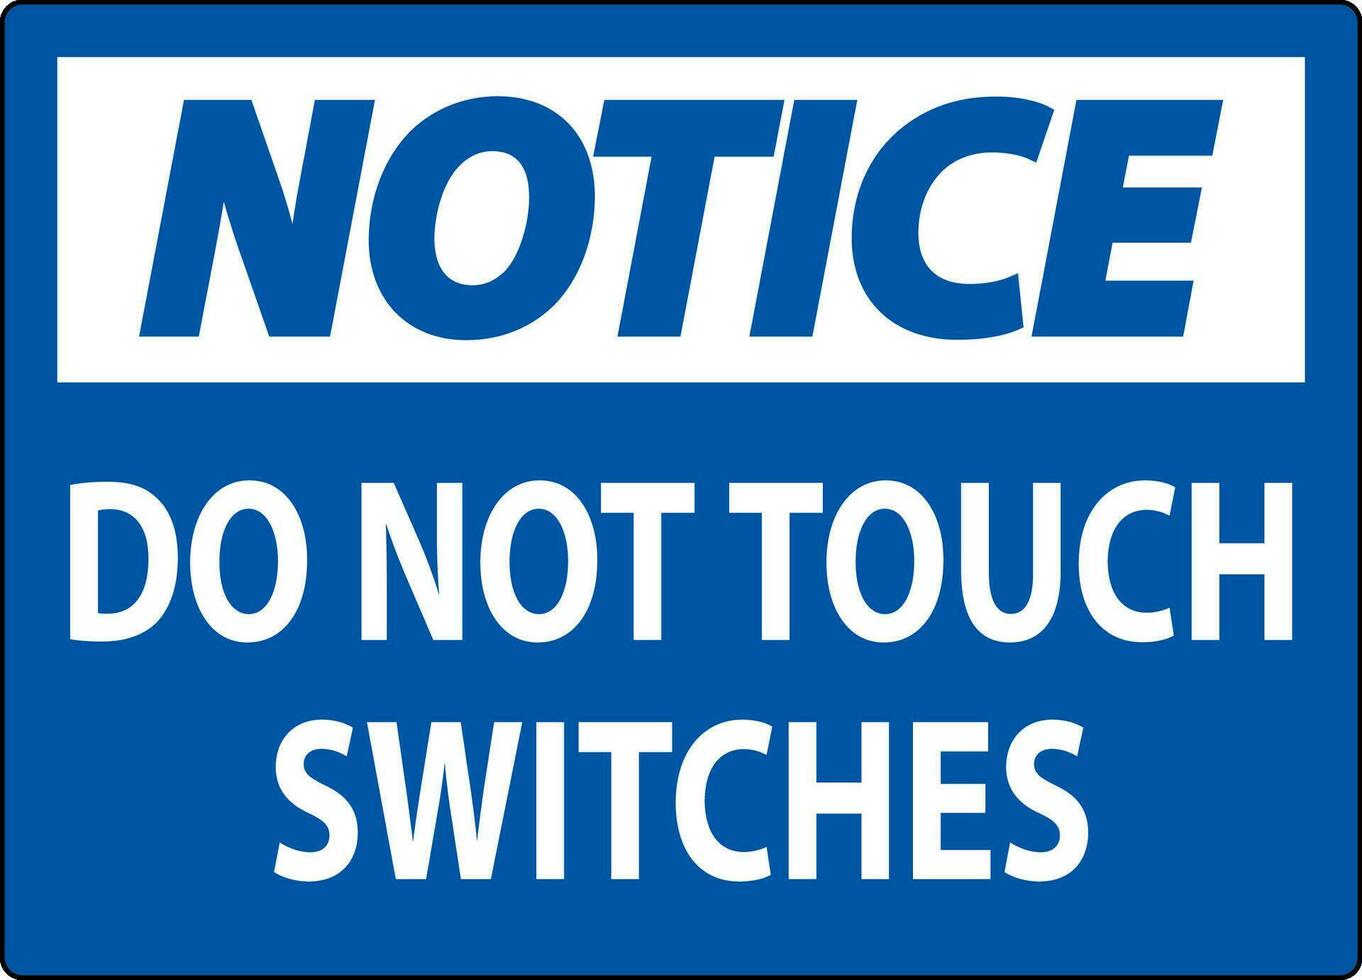 Notice Sign Do Not Touch Switches vector